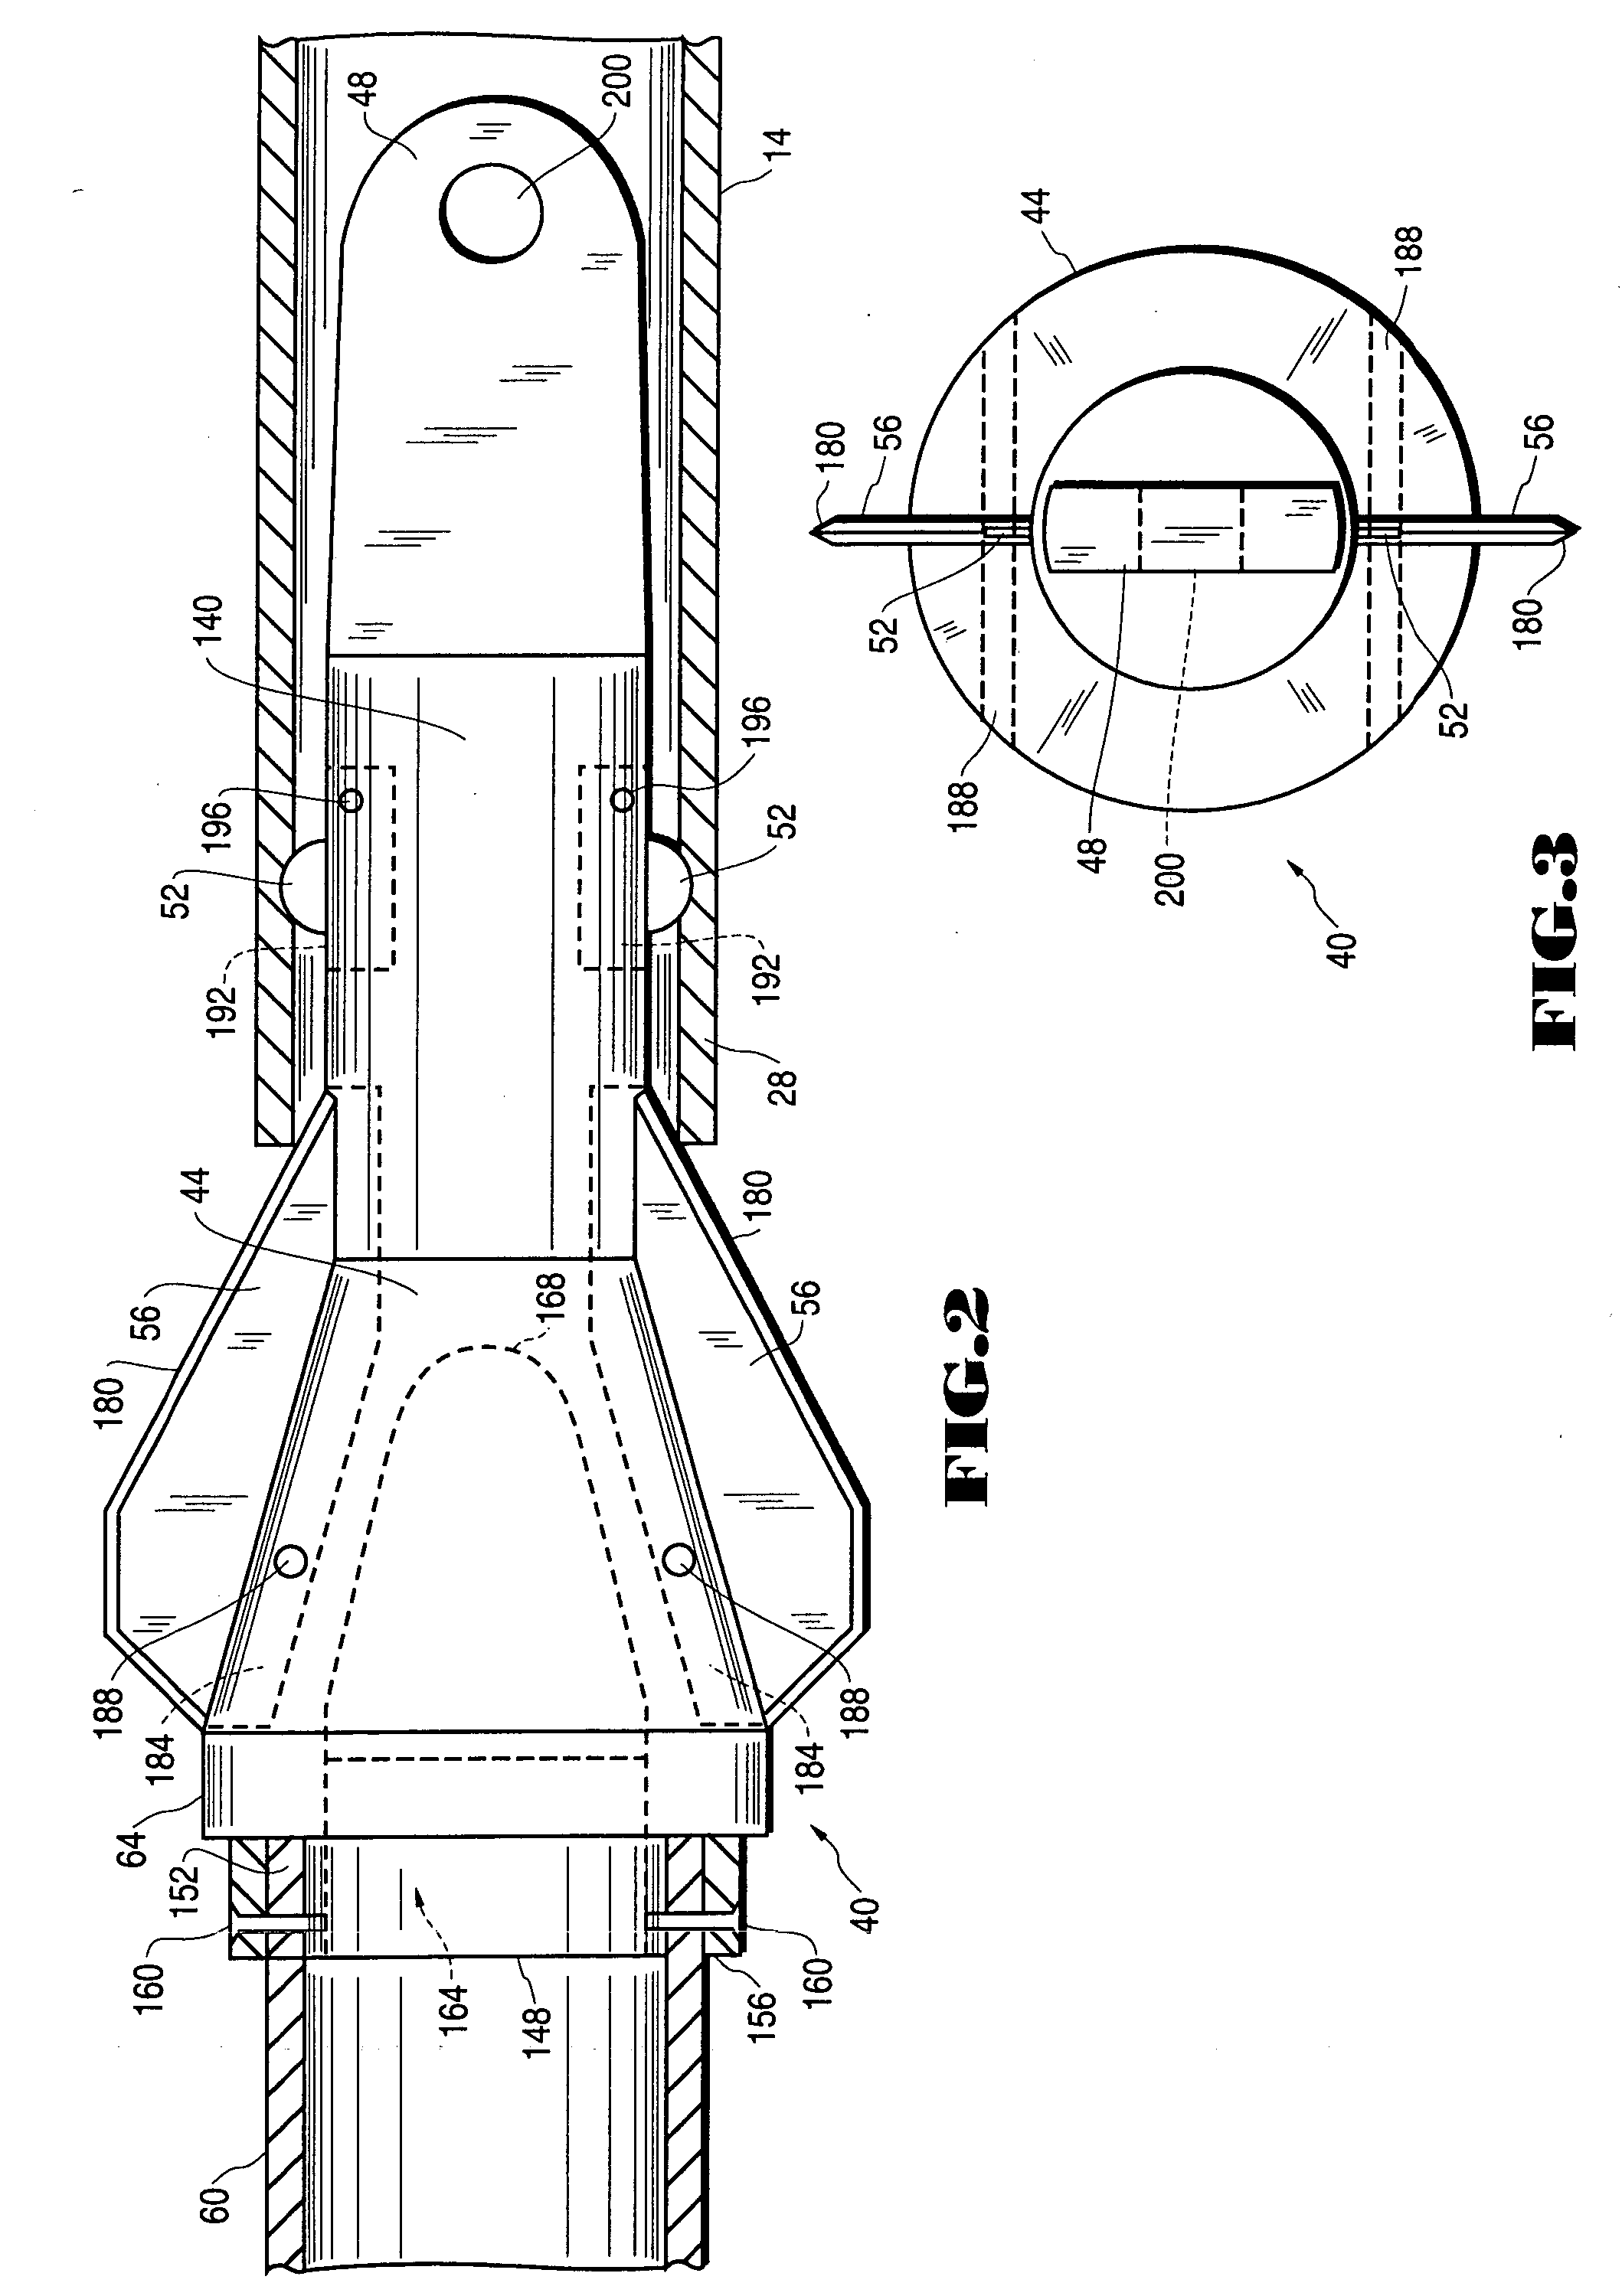 Device and method for trenchless replacement of underground pipe